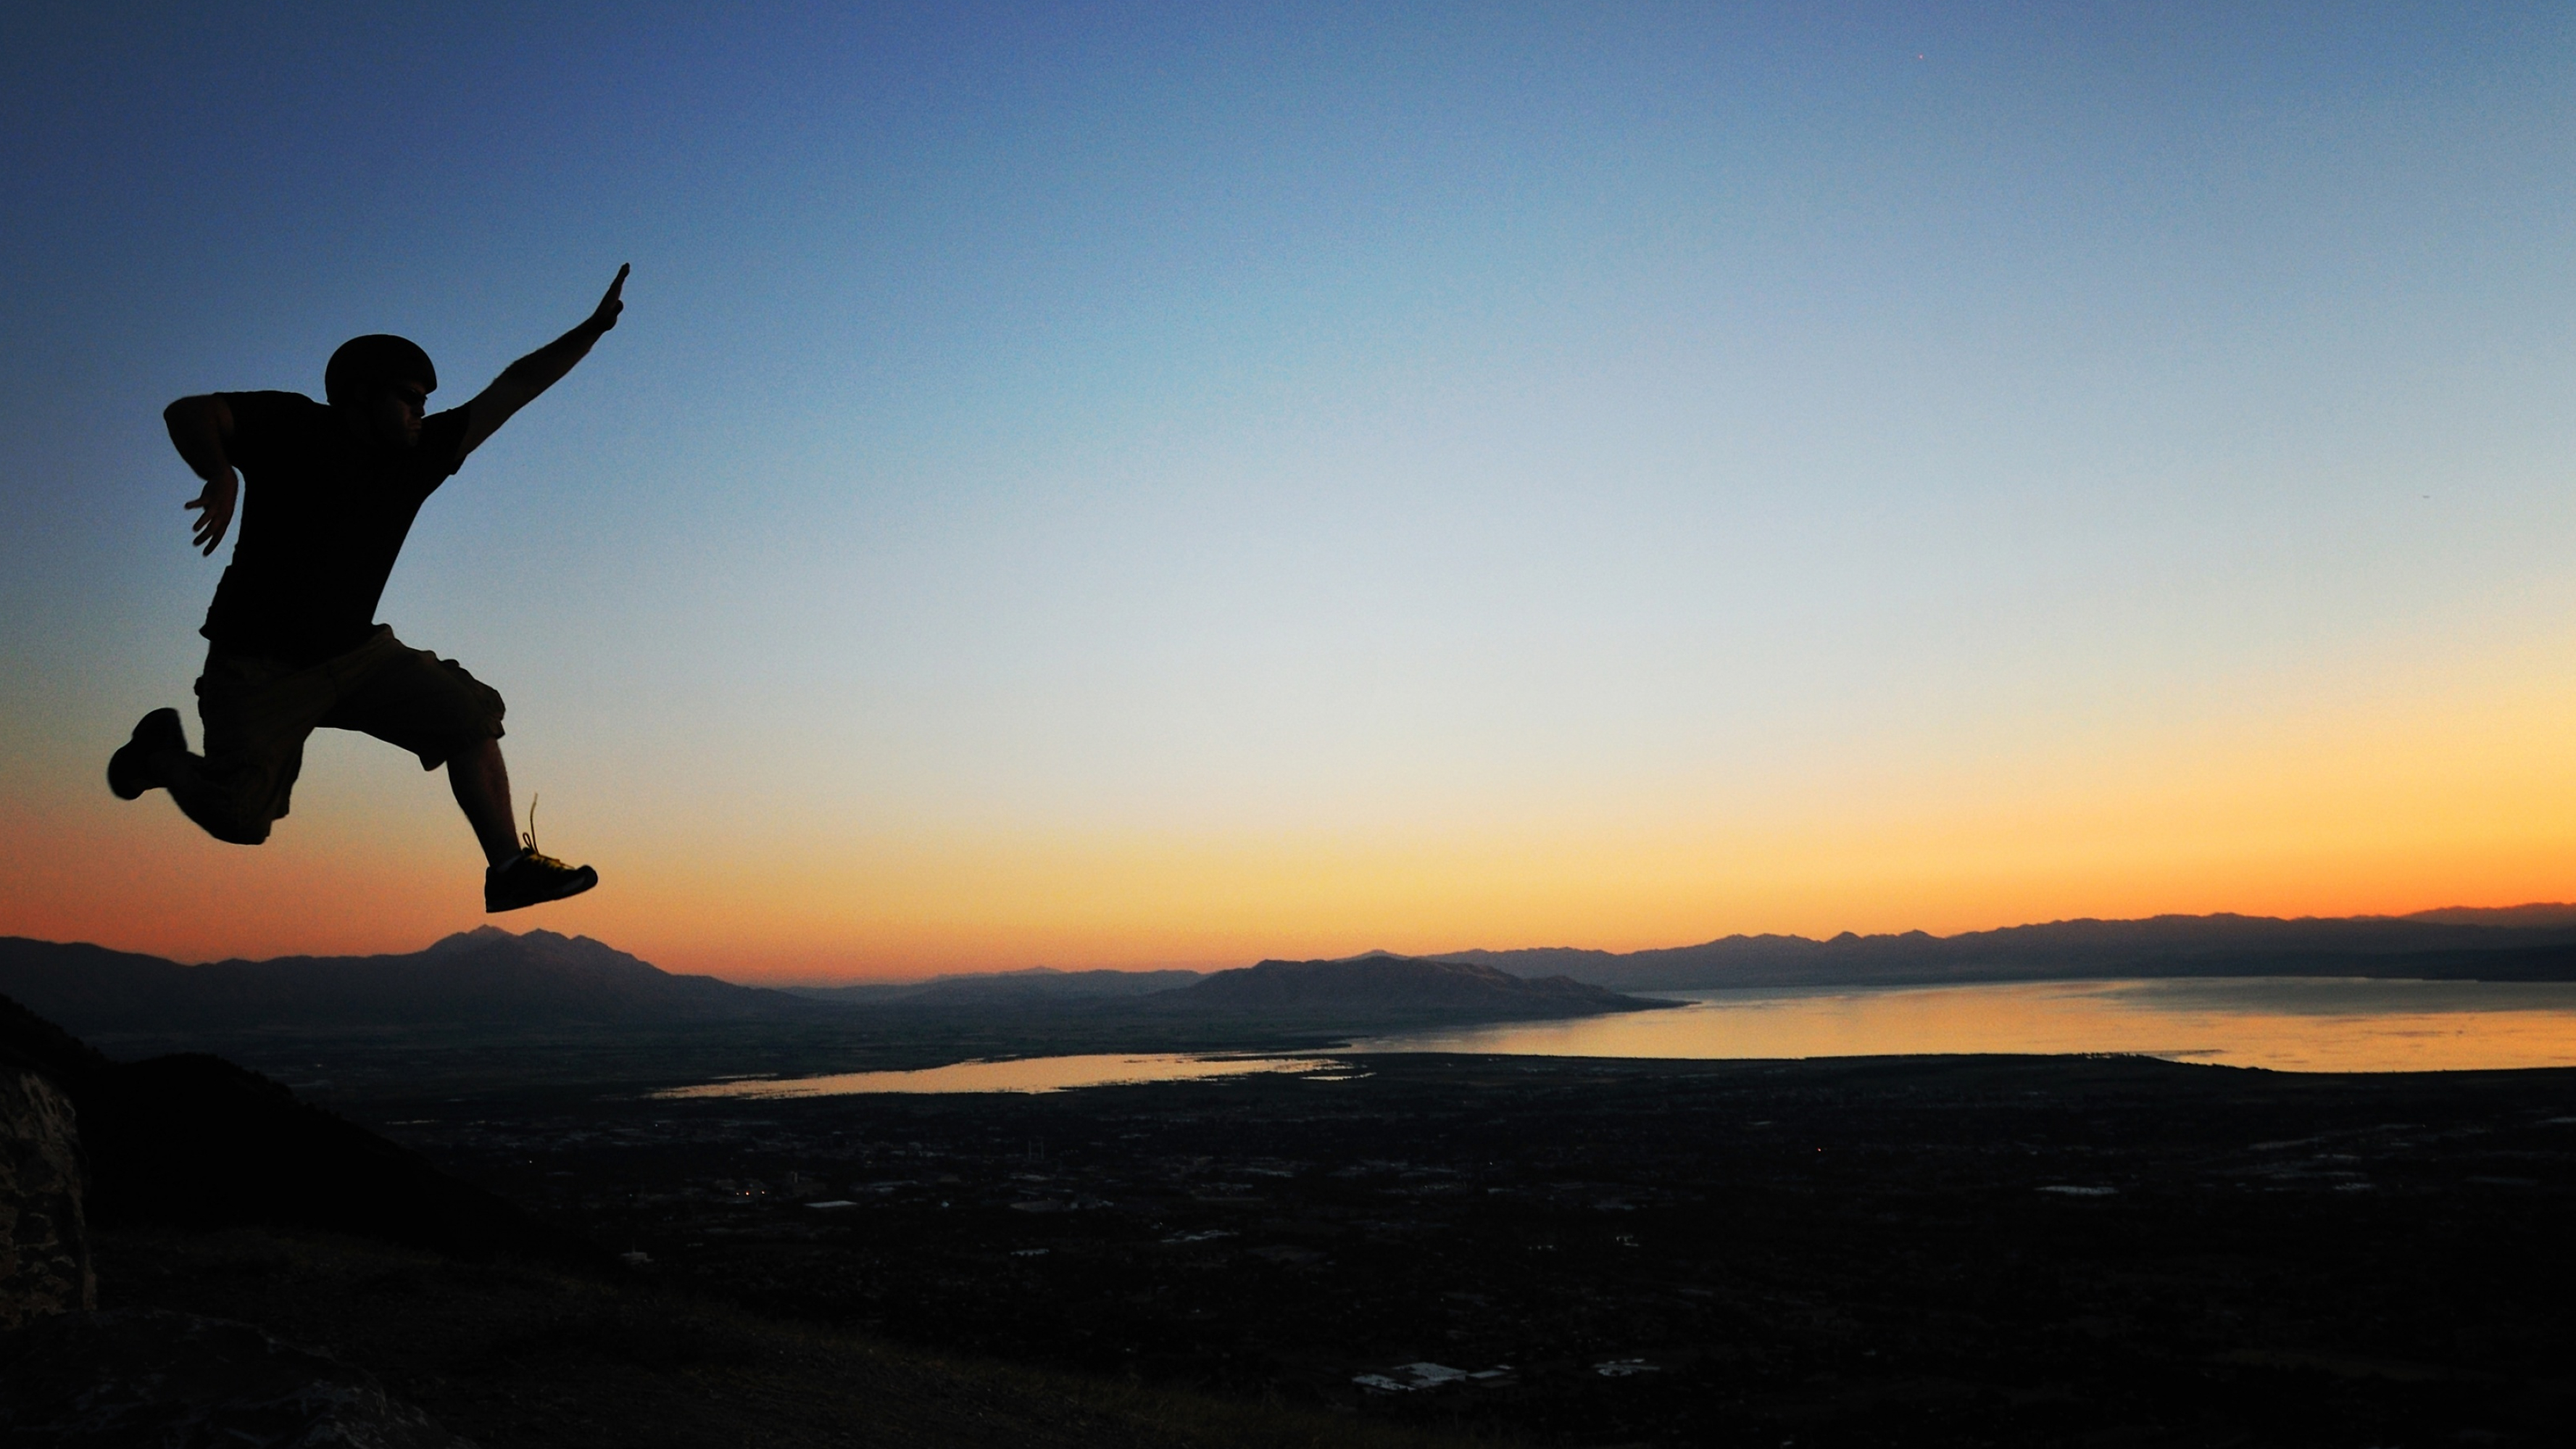 Jumping: Levitation, Springing into the air, Arial view of a sunset. 3560x2000 HD Wallpaper.